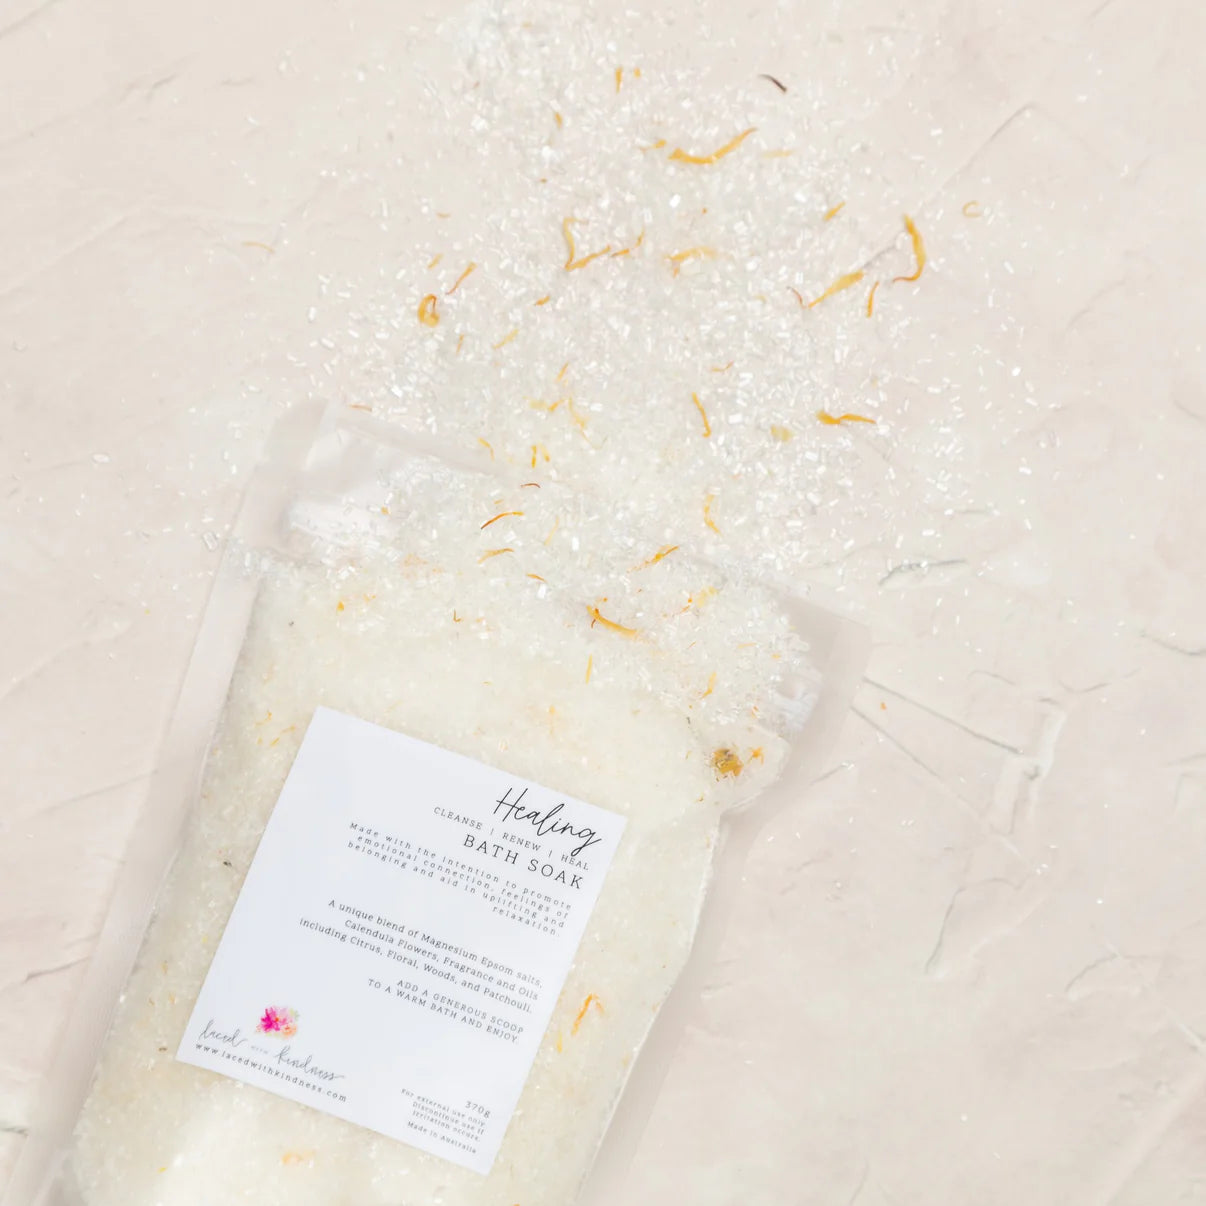 Laced with Kindness Bath Soak | Healing